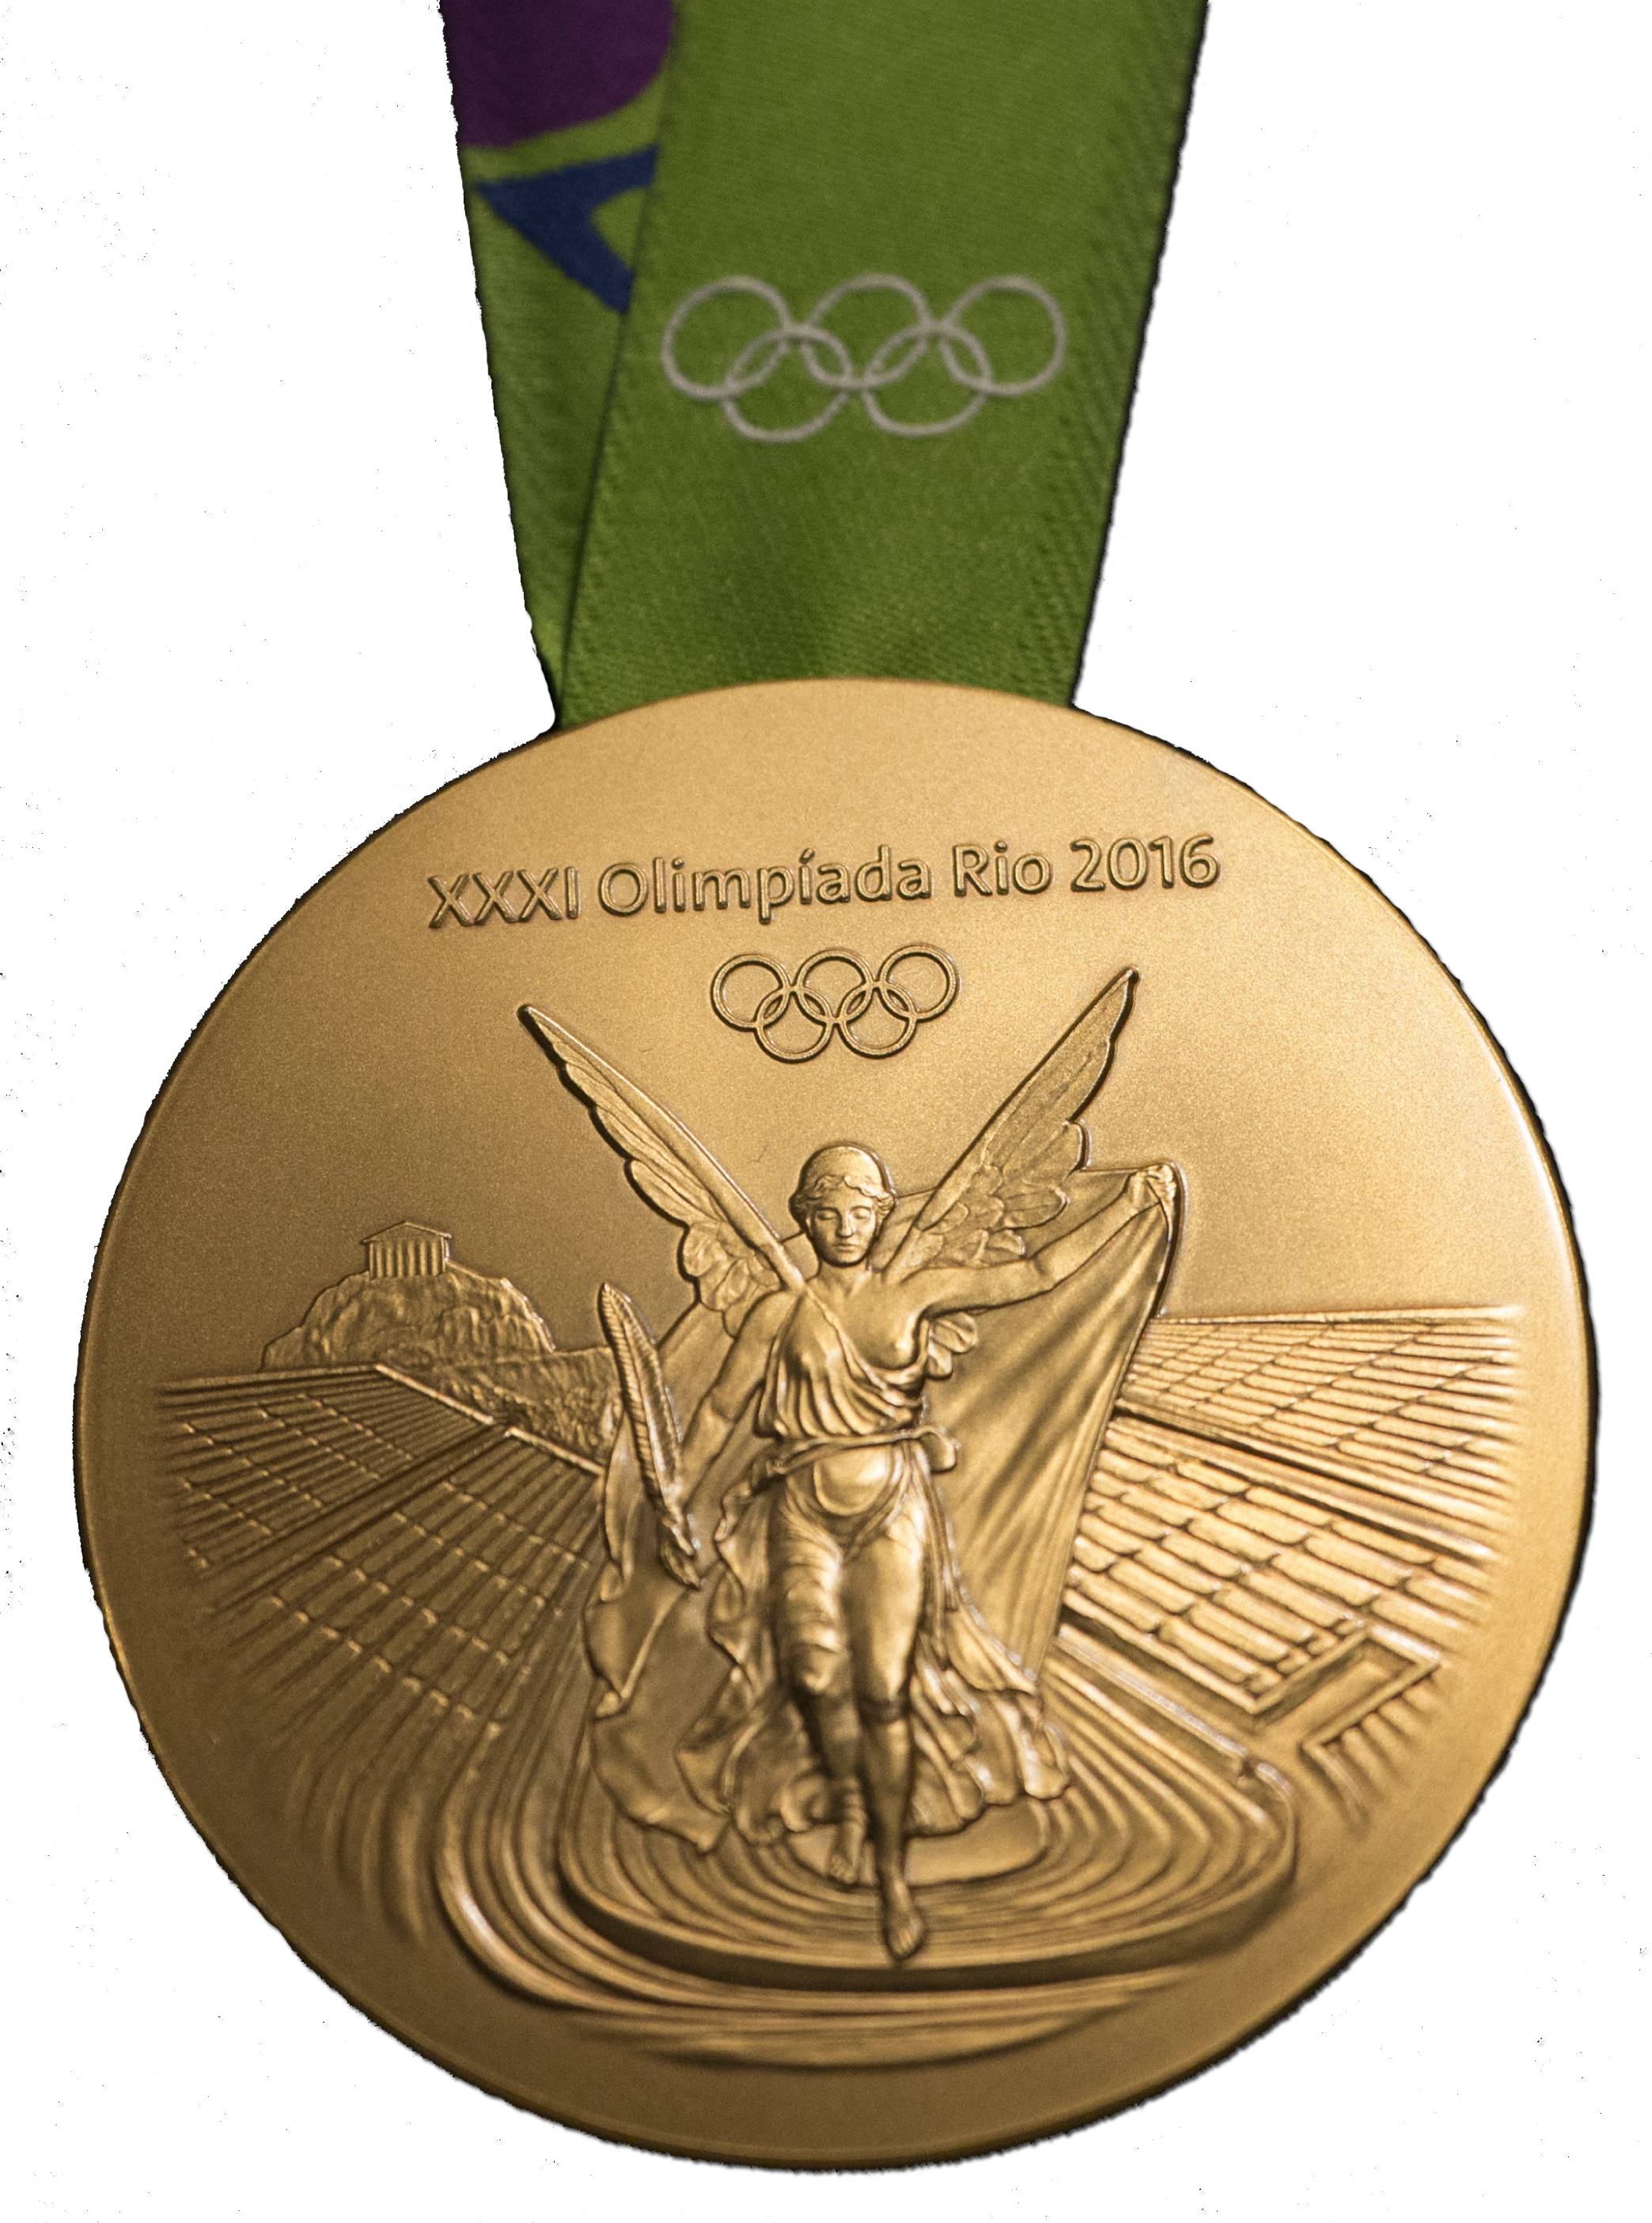 Goldmedaille